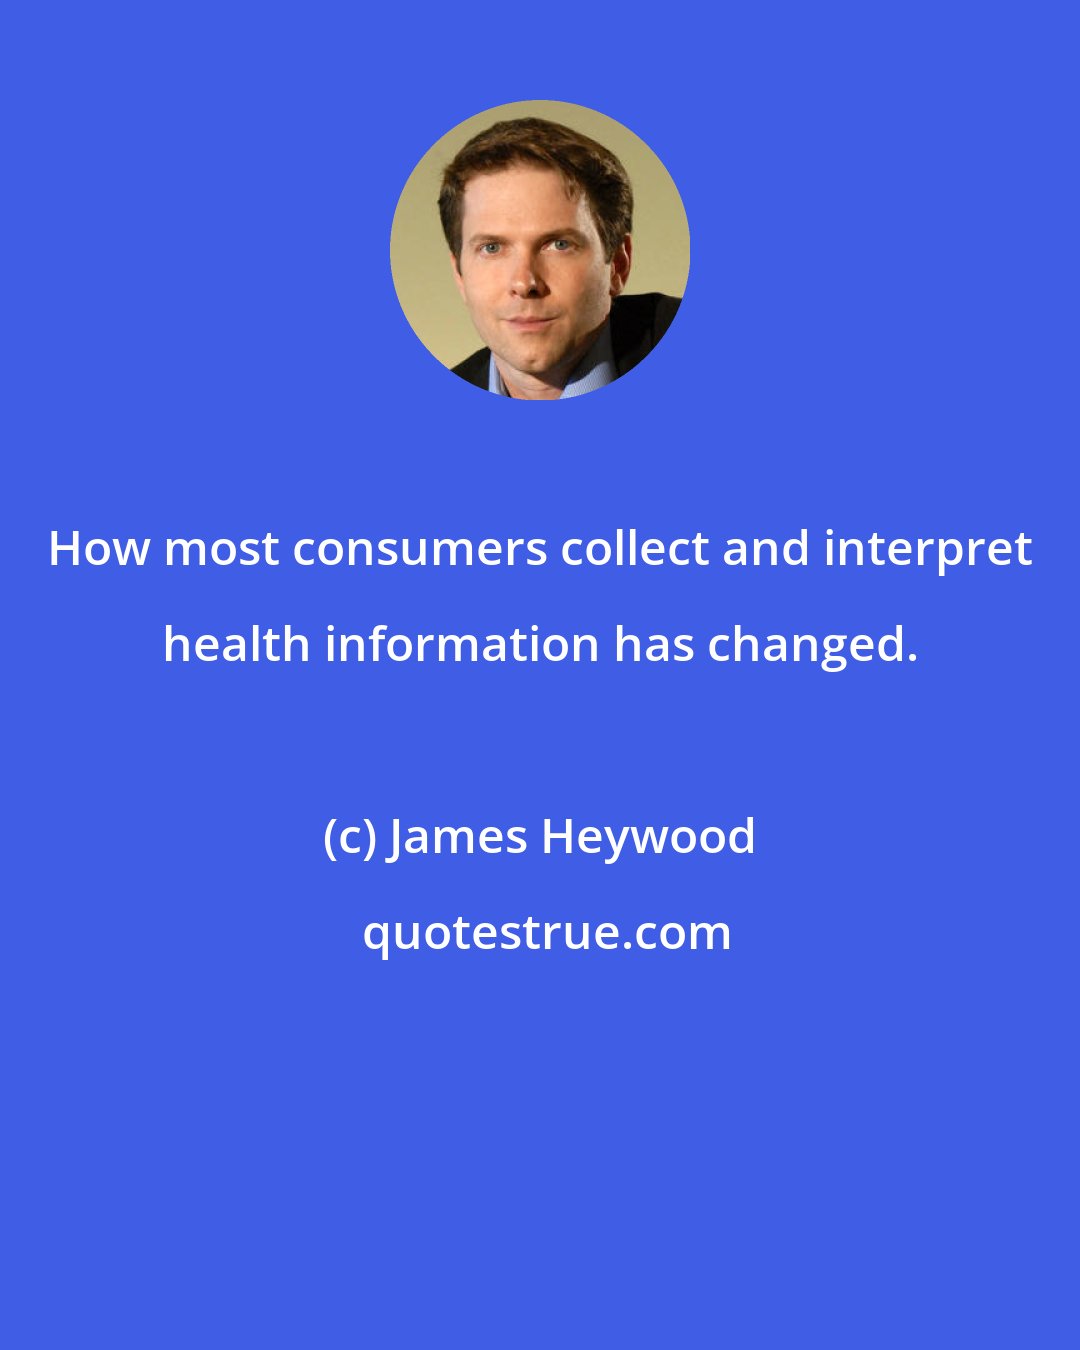 James Heywood: How most consumers collect and interpret health information has changed.